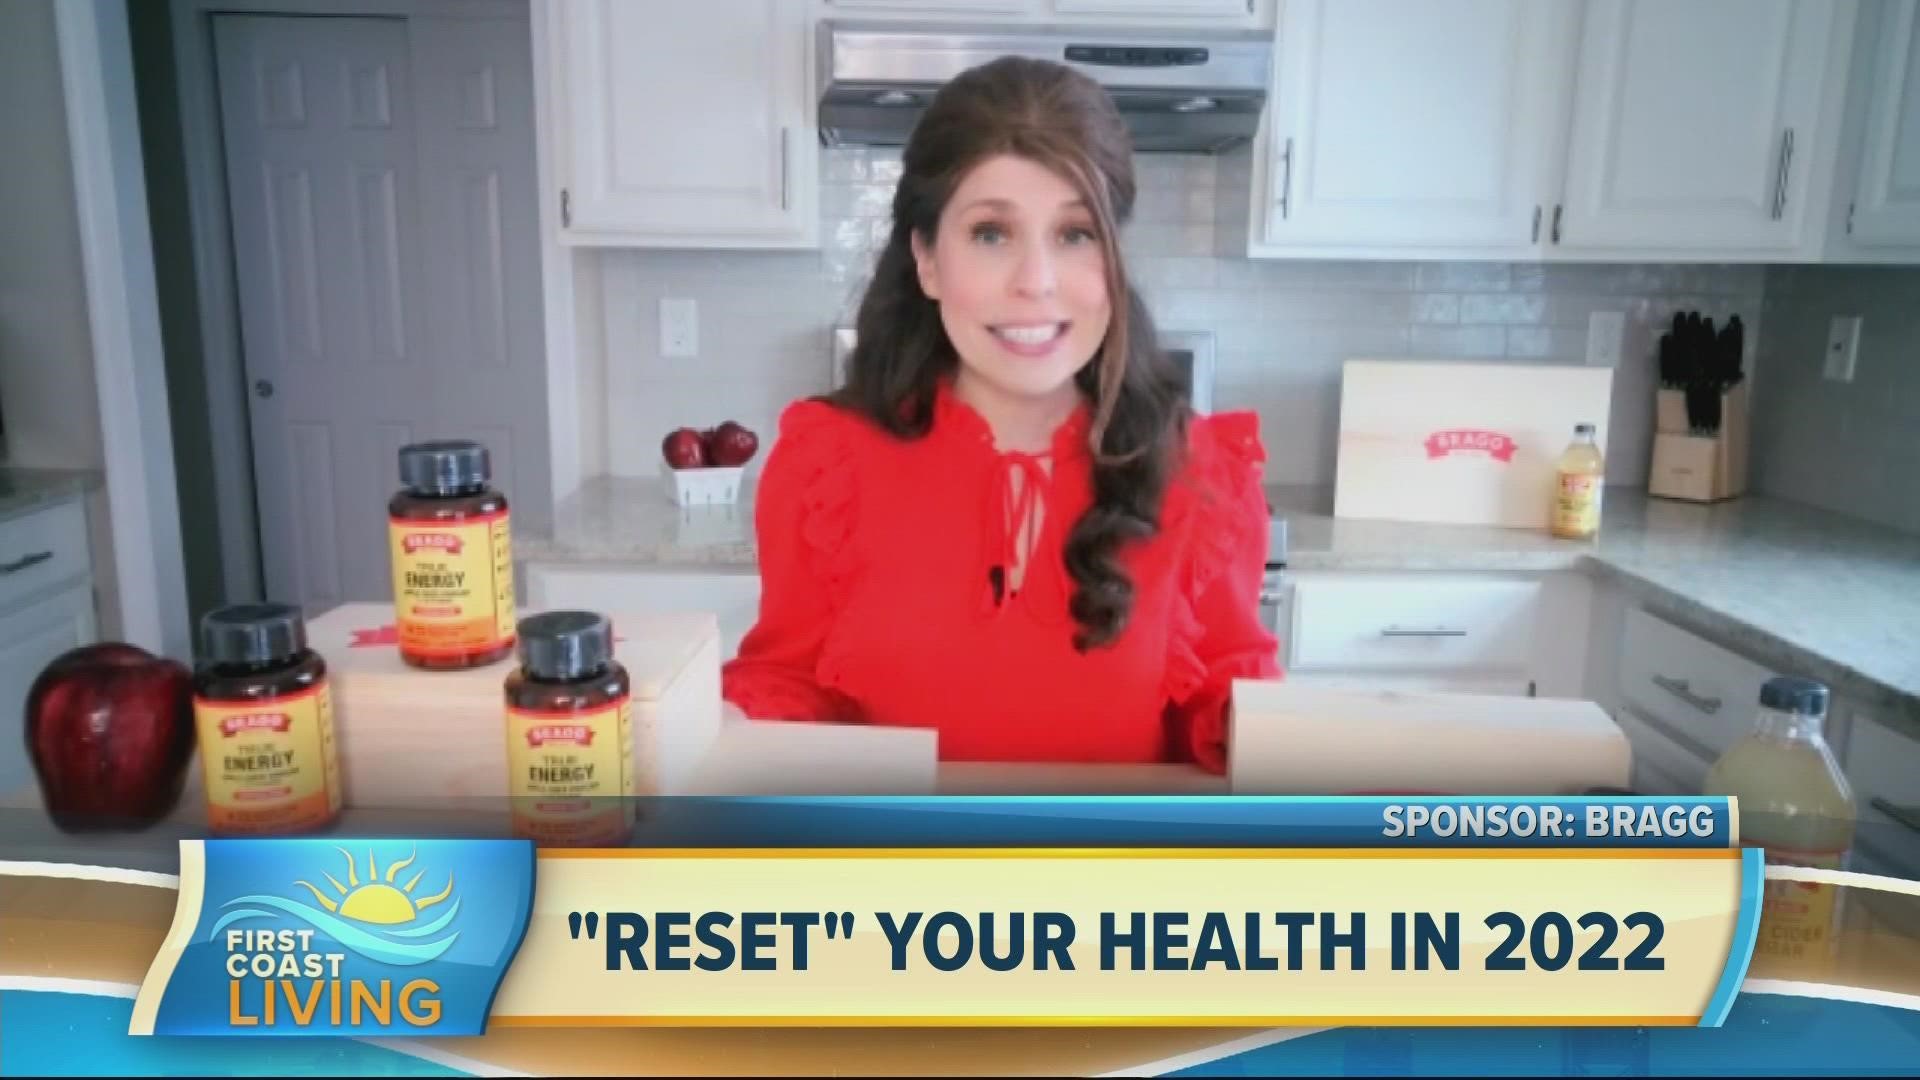 Registered Dietitian, Erin Palinski-Wade shares the health benefits of ACV, as well as Bragg's new line of supplements for those who dislike the taste.